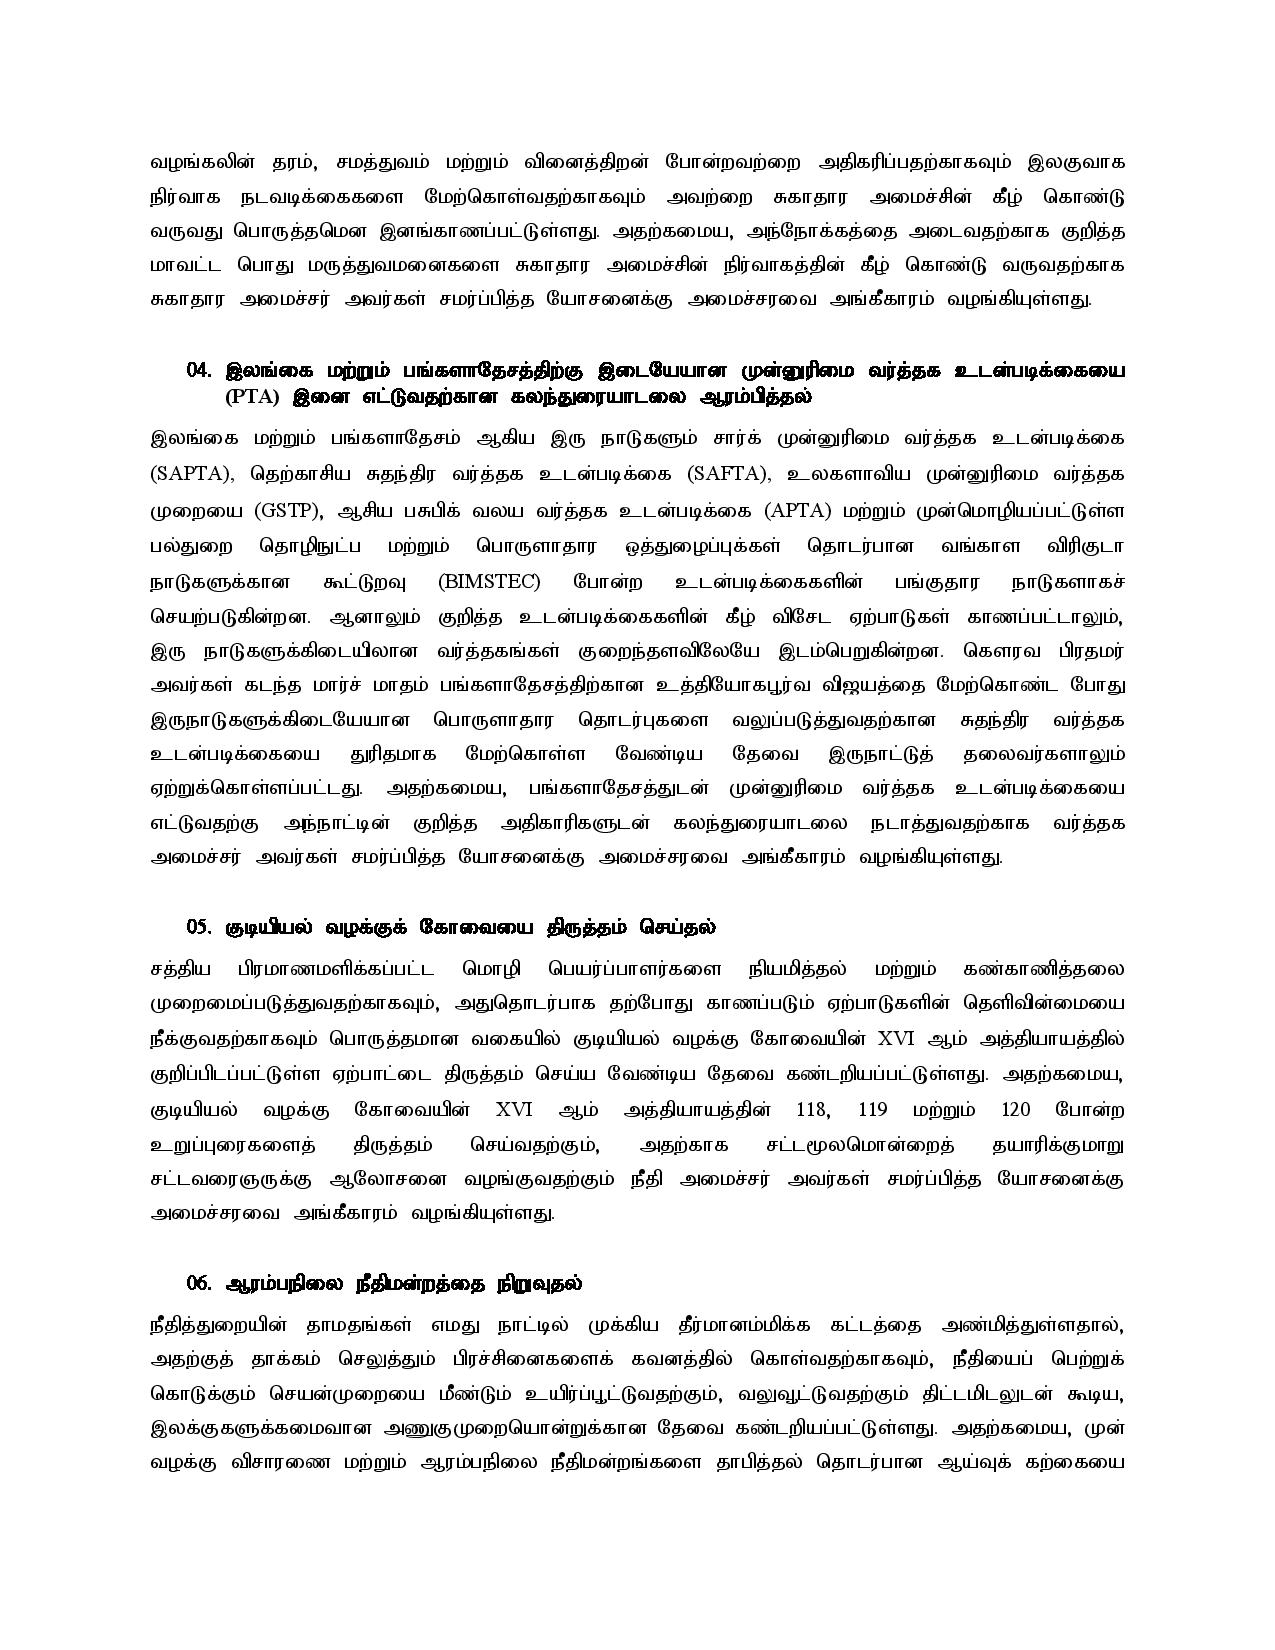 Cabinet Decisions 14.06.2021 Tamil page 002